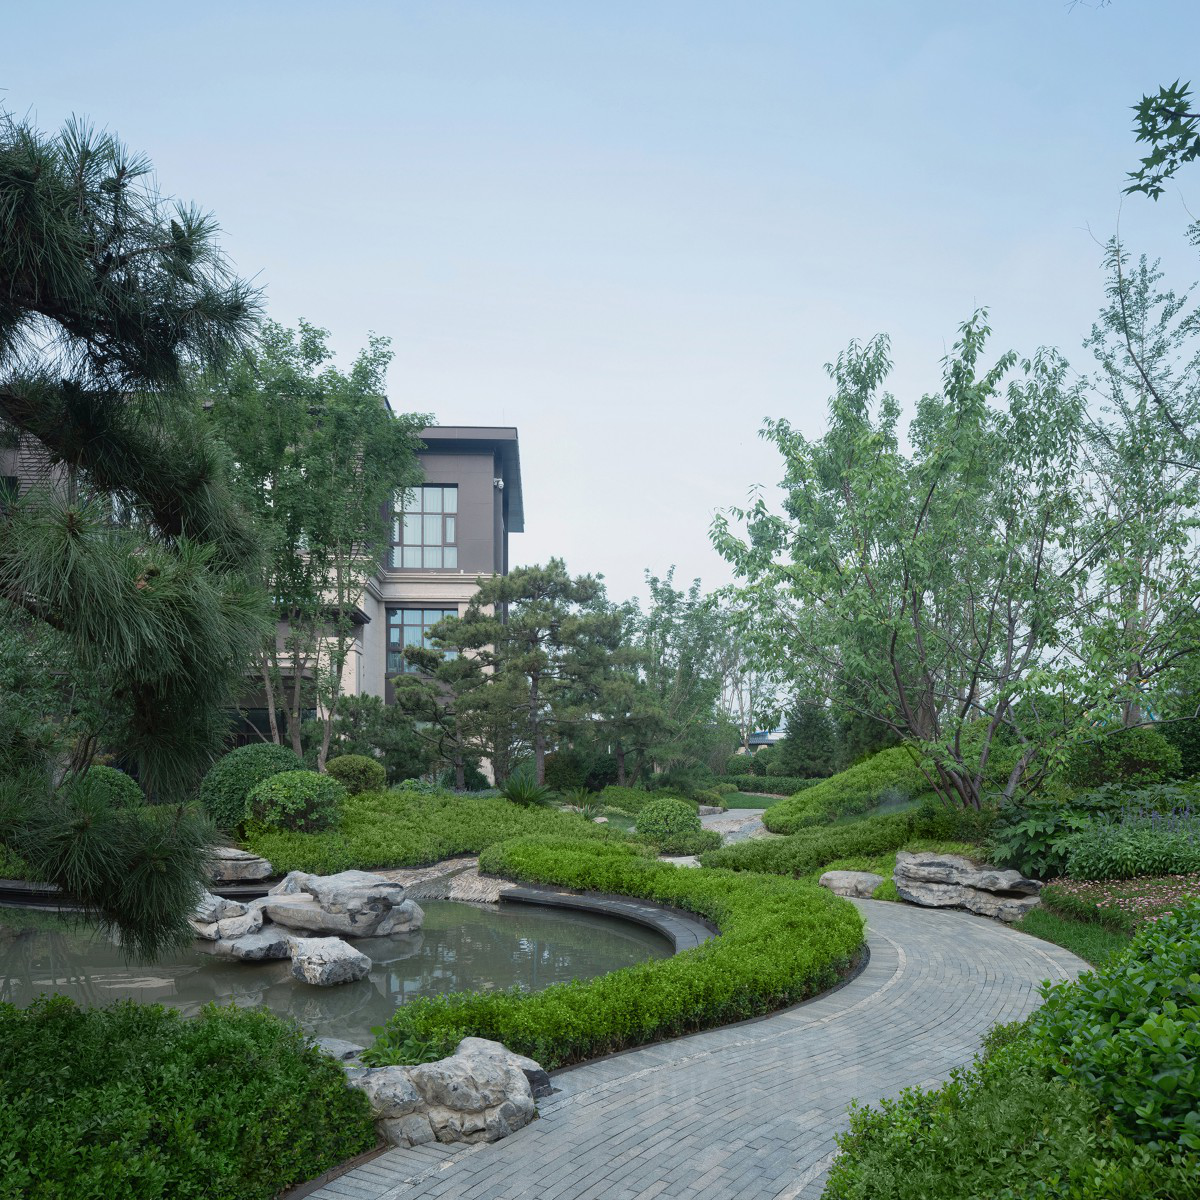 U.P.Space Landscape Design wins Golden at the prestigious A' Landscape Planning and Garden Design Award with Guomaofu Residential Demonstration.